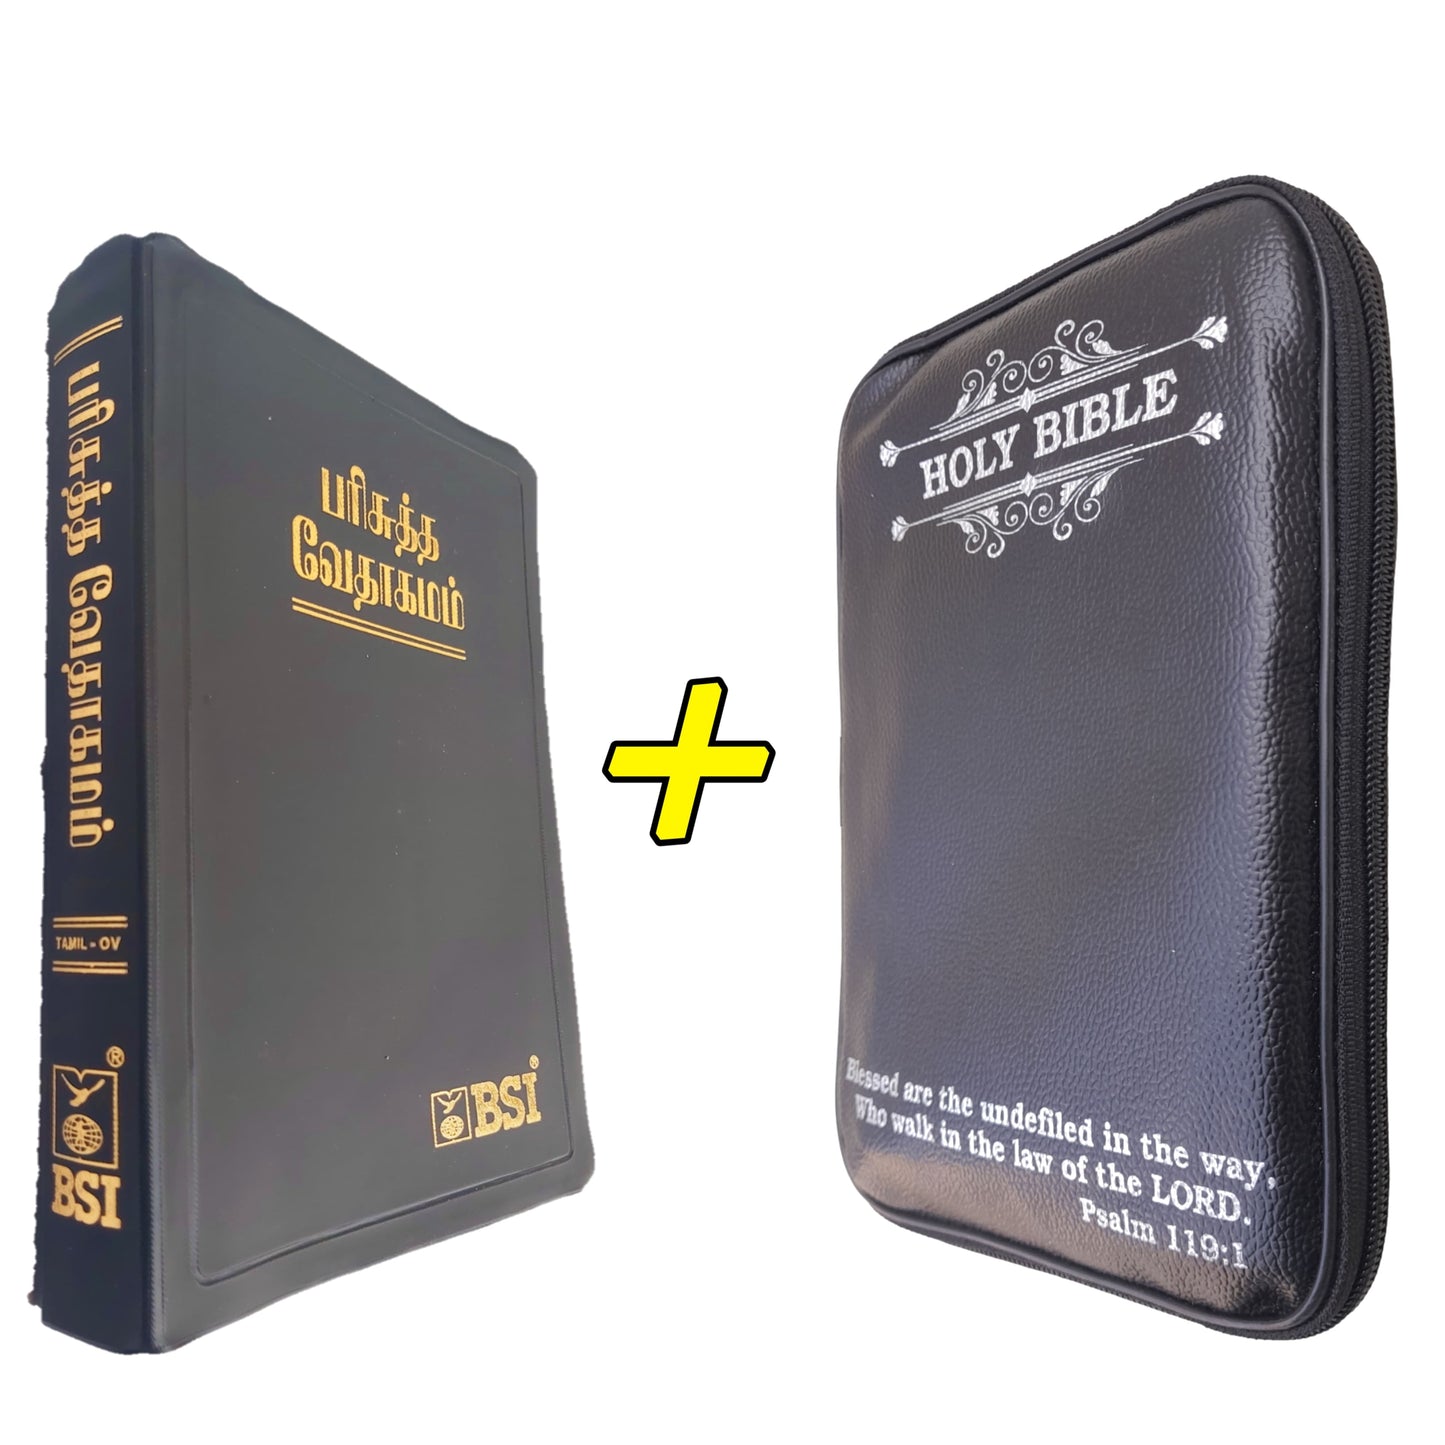 The Holy Tamil Bible With Rexine Cover Combo Offer